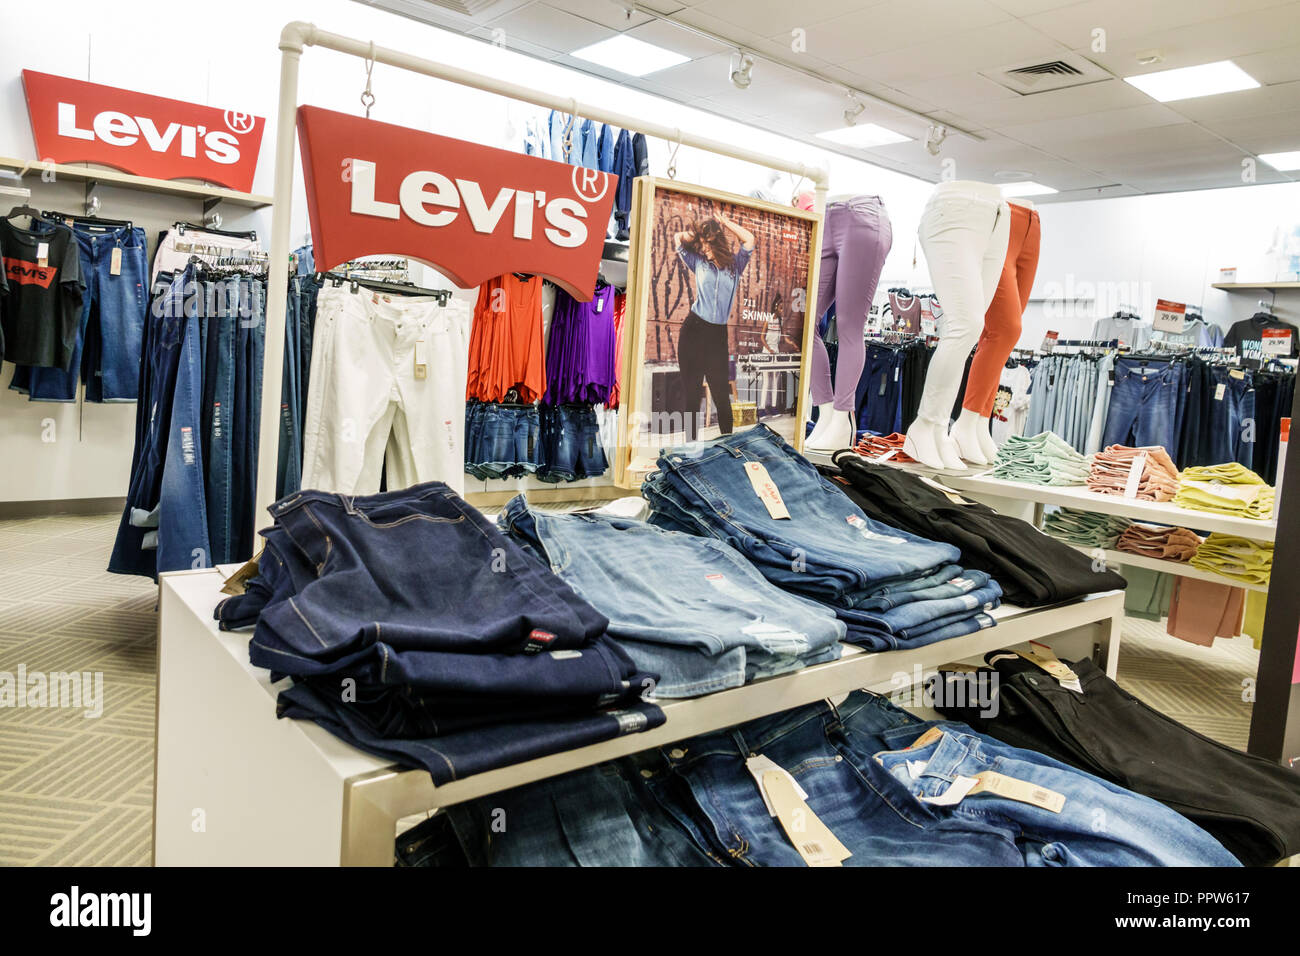 levi's clearance outlet